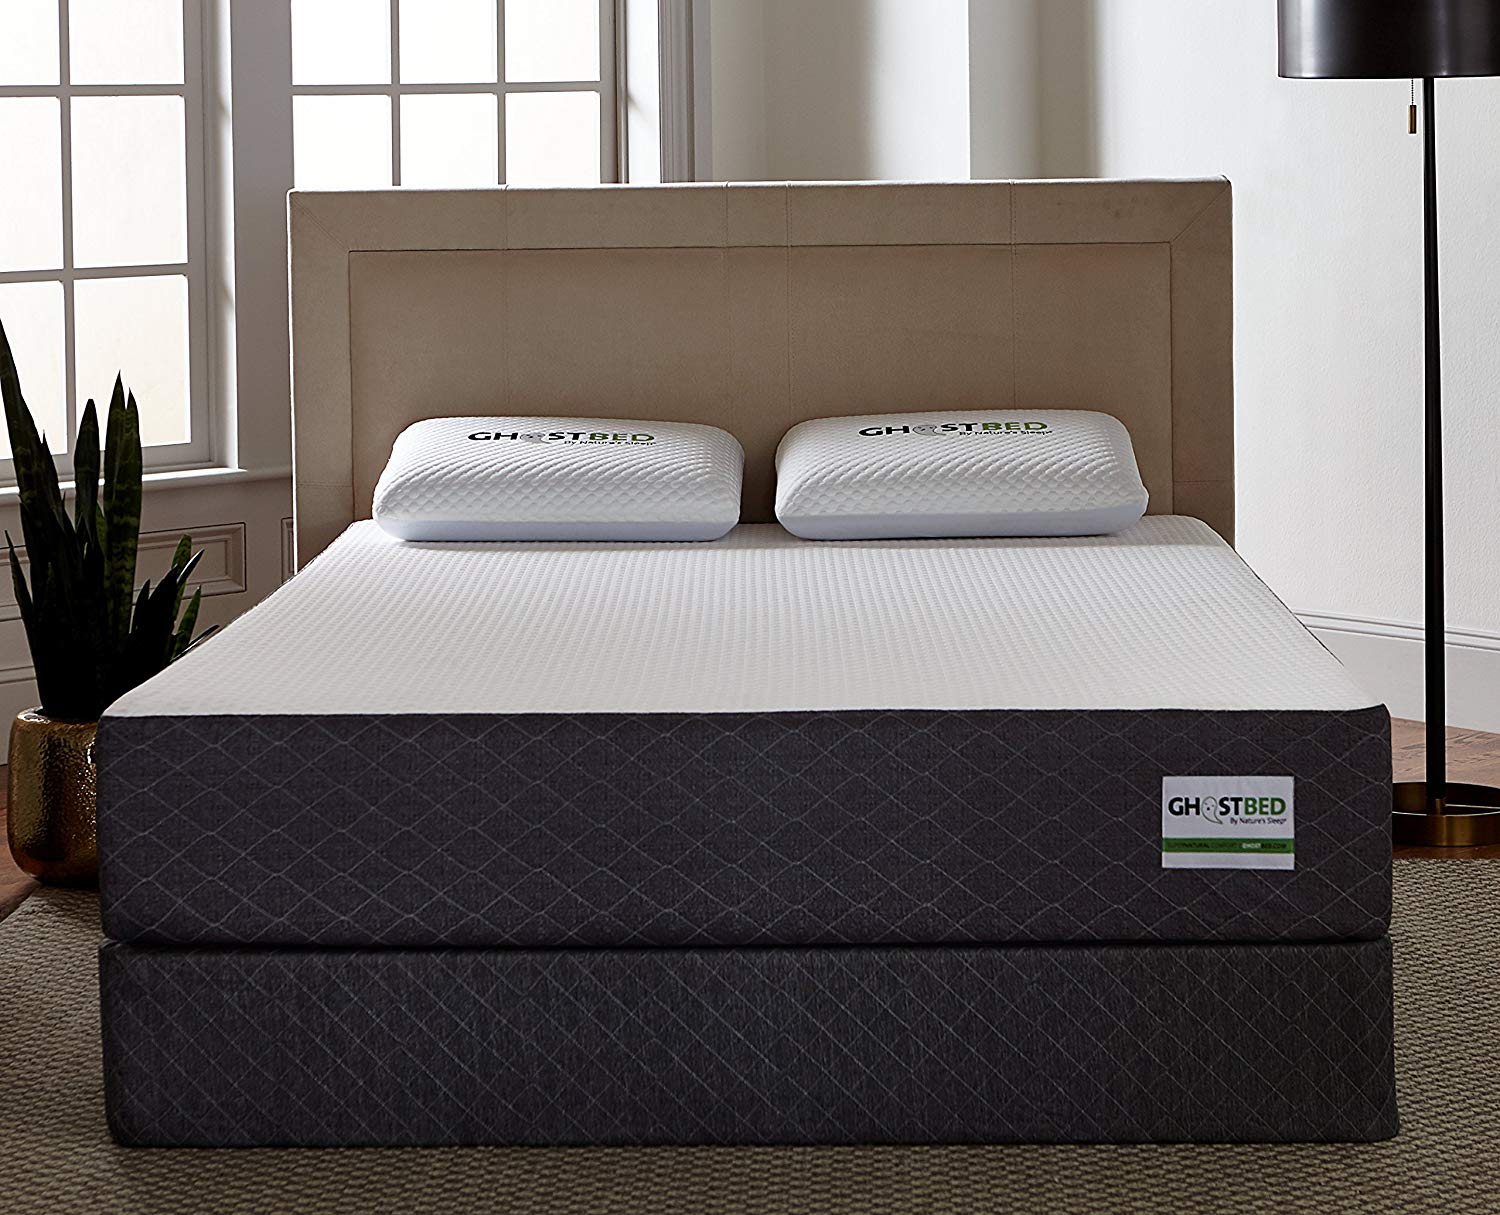 ghostbed hybrid 12 mattress review